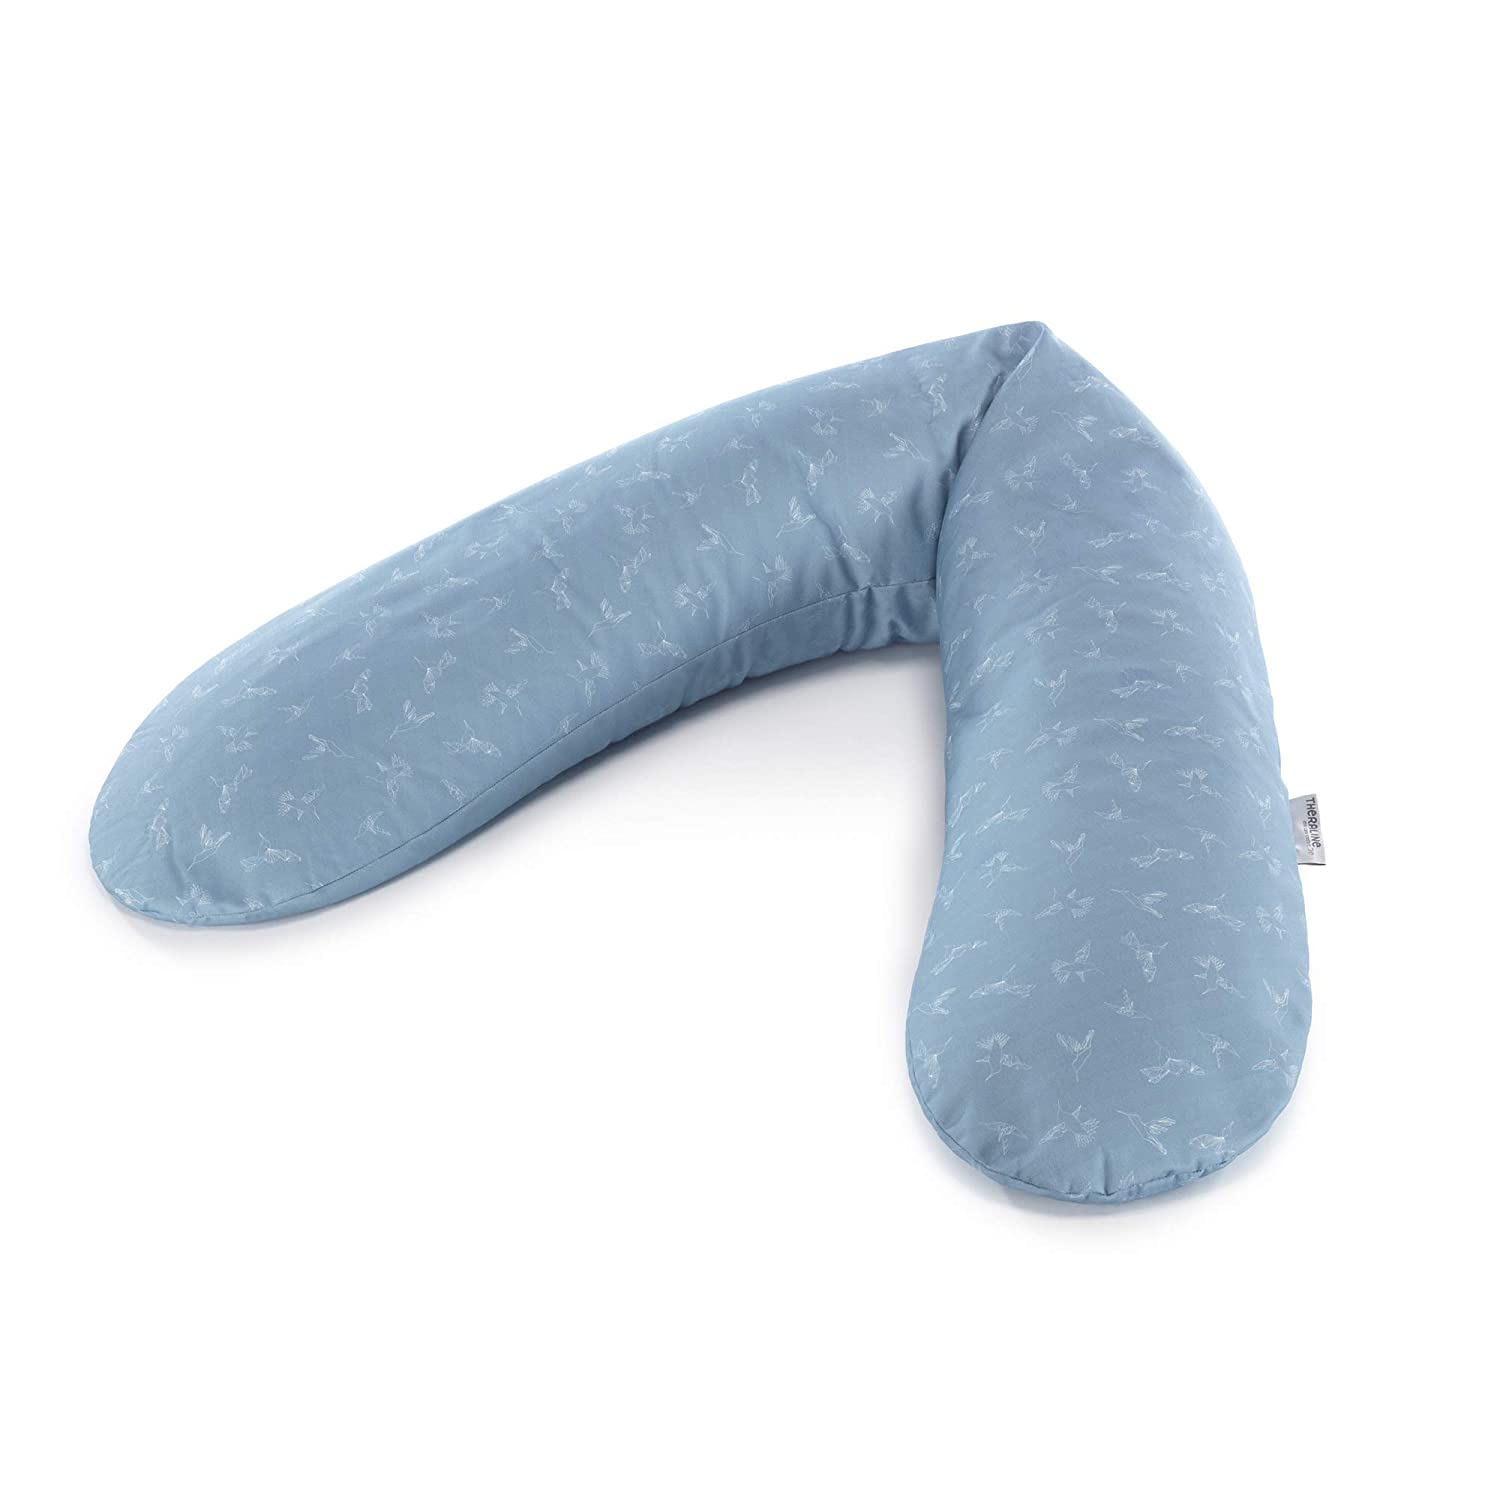 Theraline Original Pregnancy And Breastfeeding Pillow, Filled With Sand-Lik